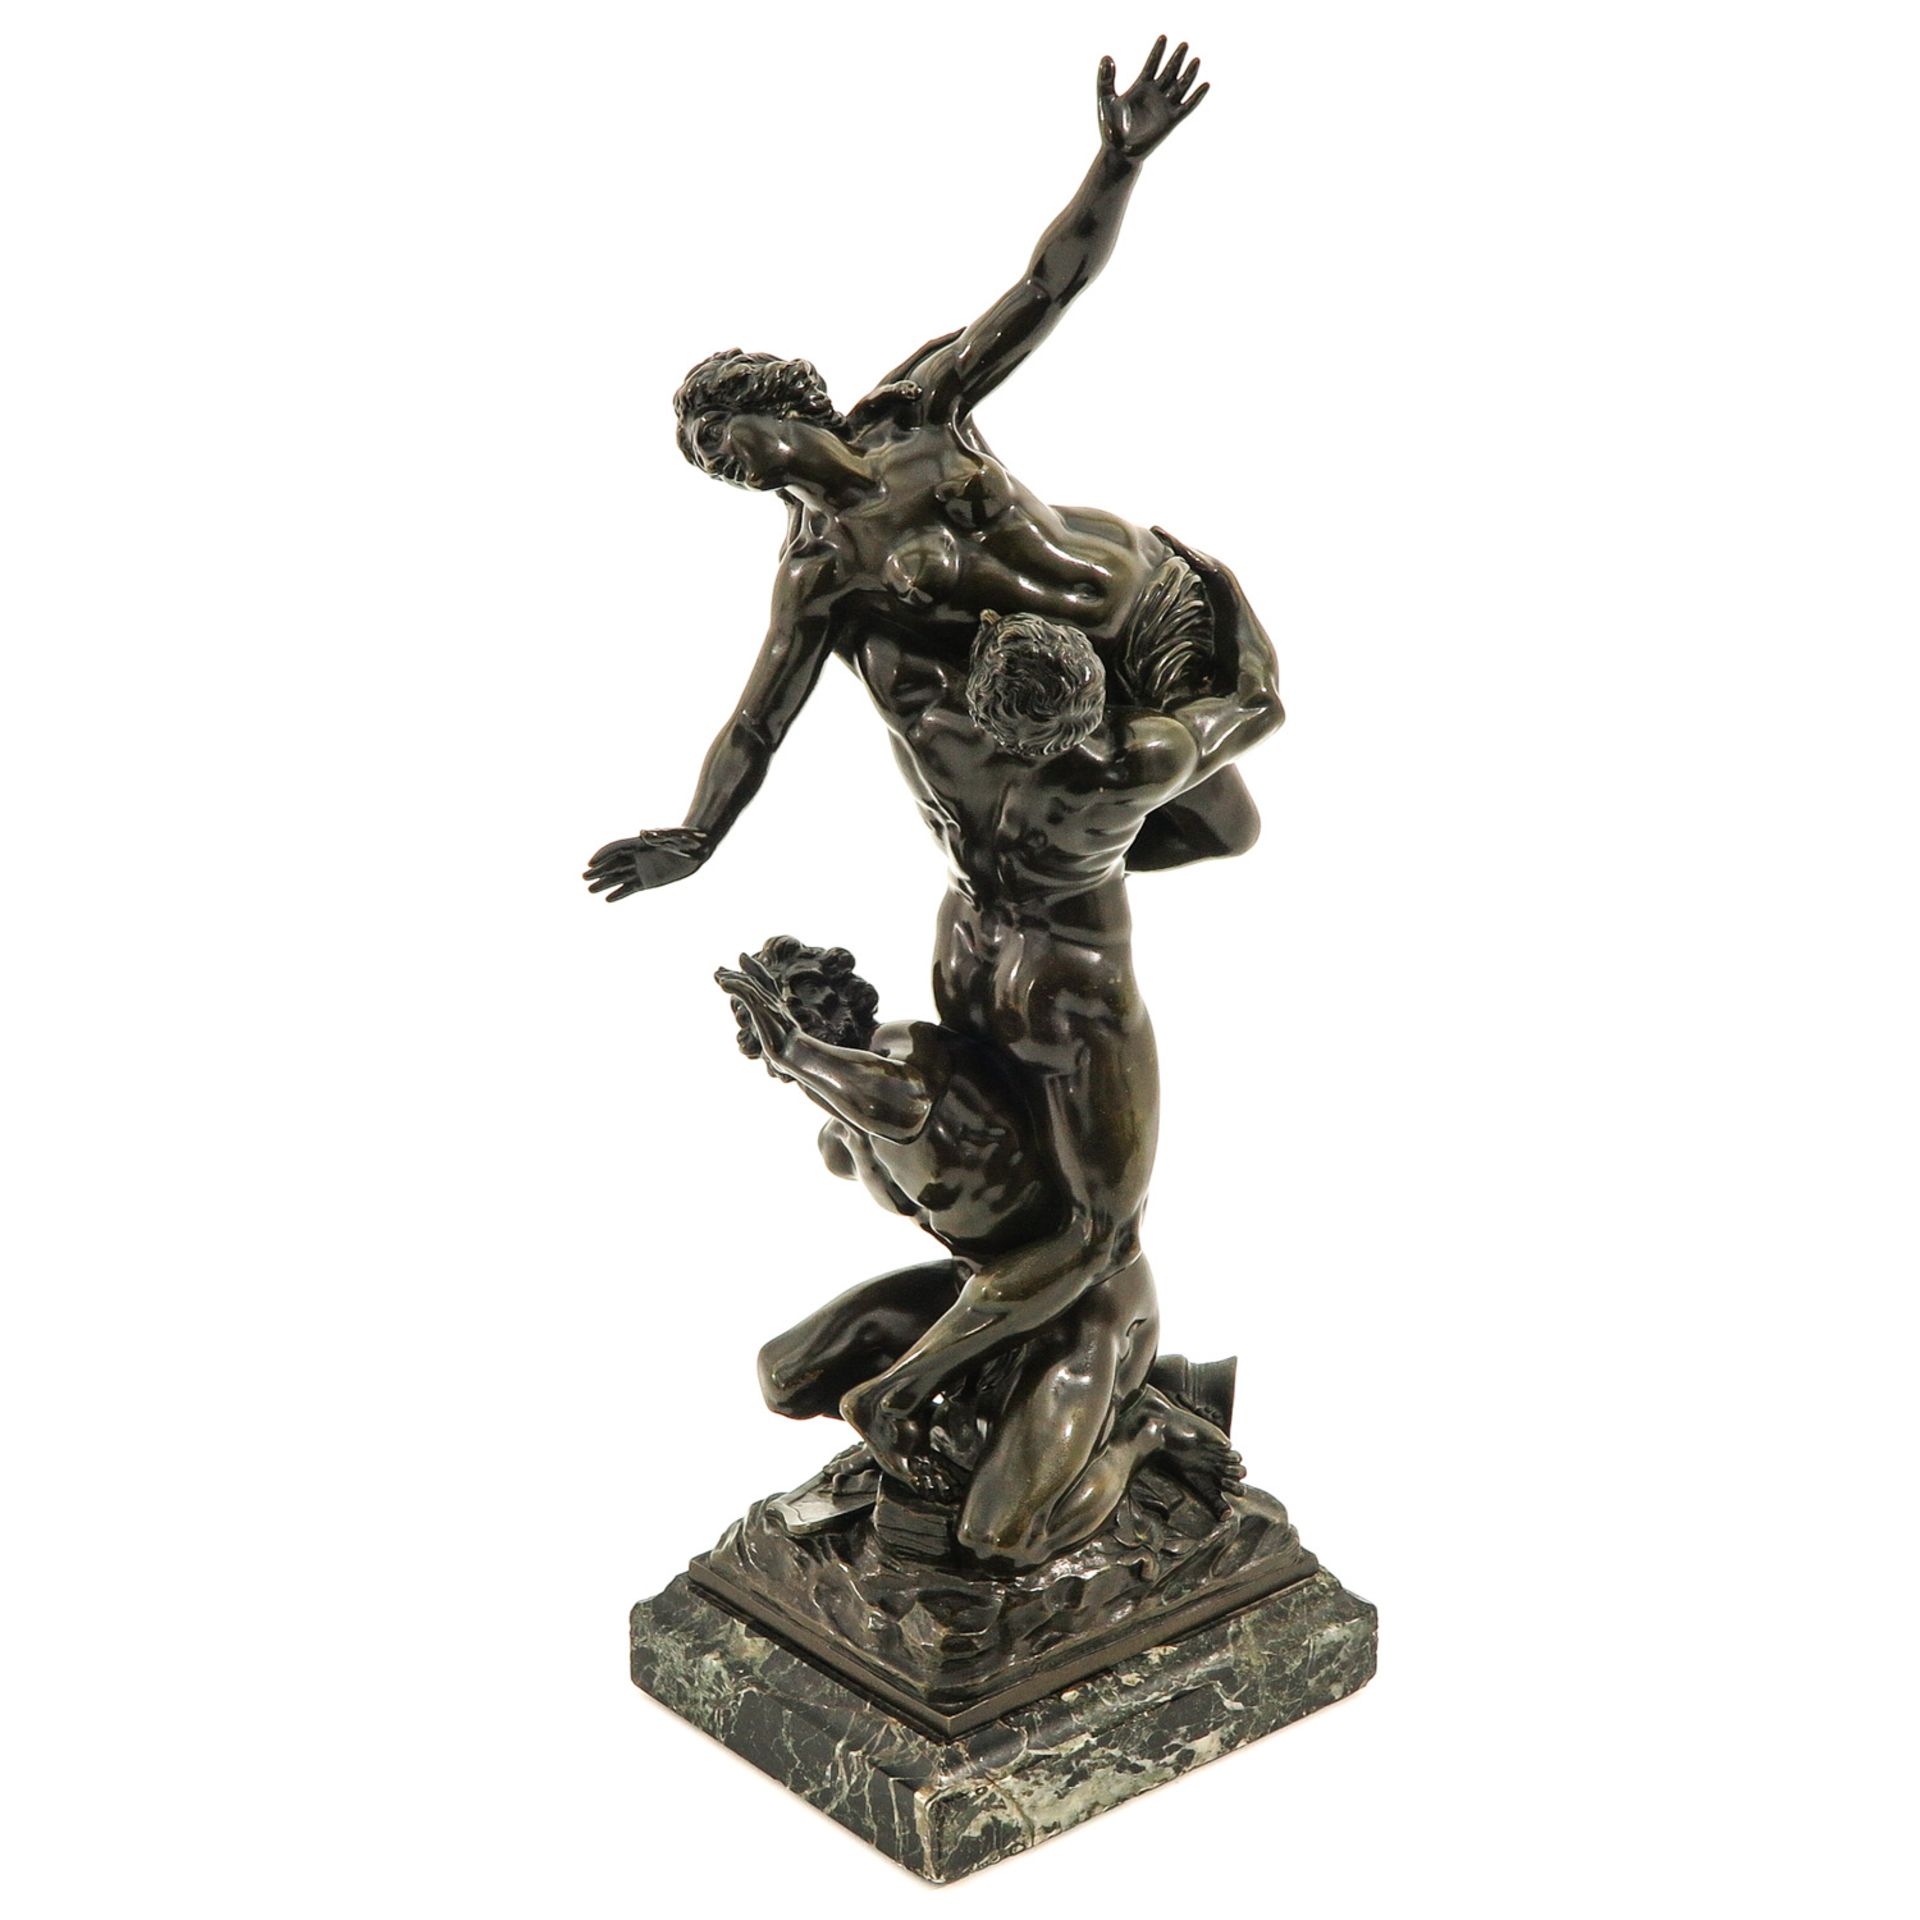 A 19th Century French Bronze Sculpture